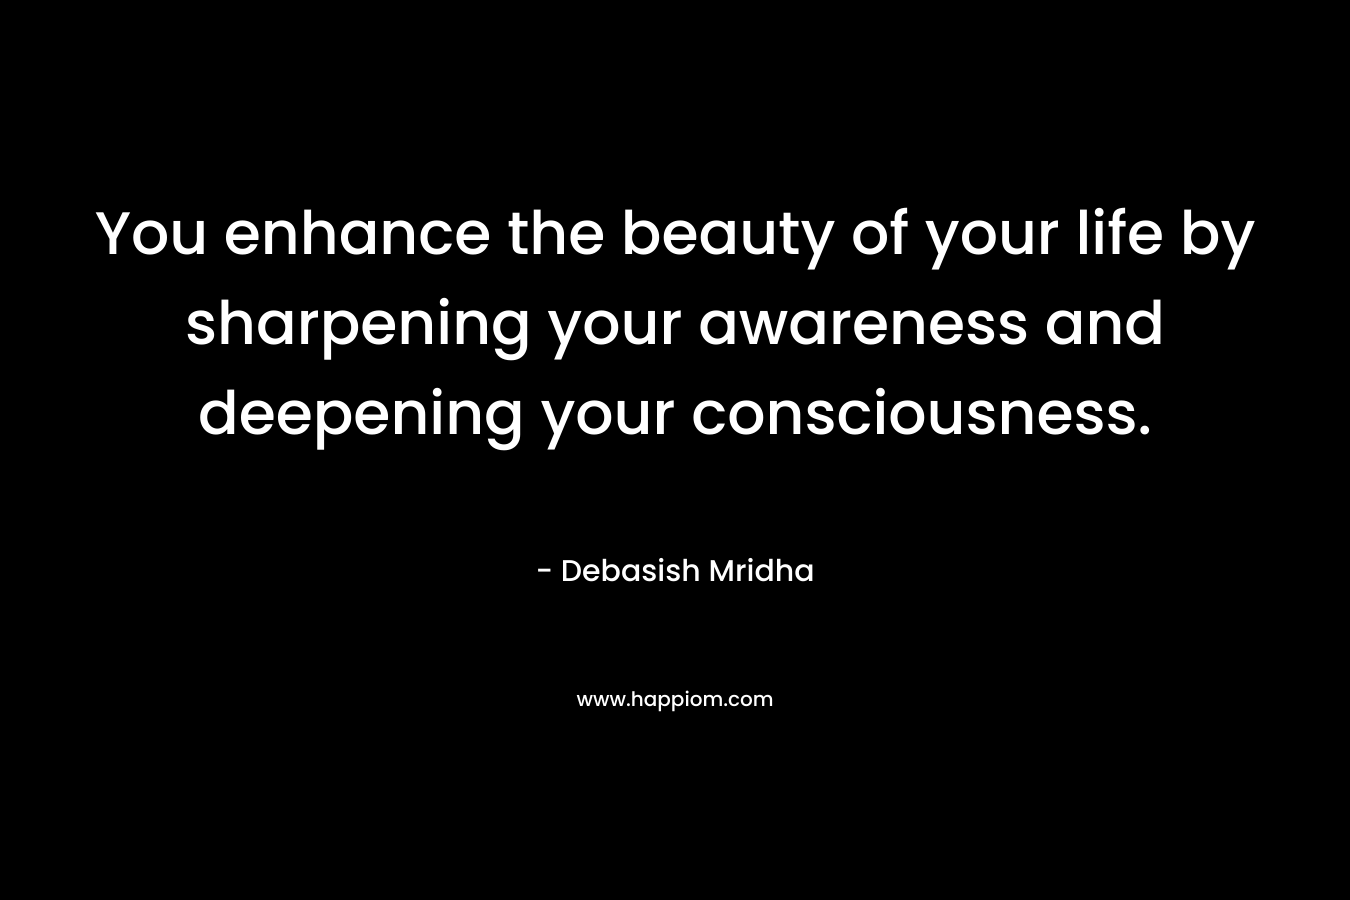 You enhance the beauty of your life by sharpening your awareness and deepening your consciousness.